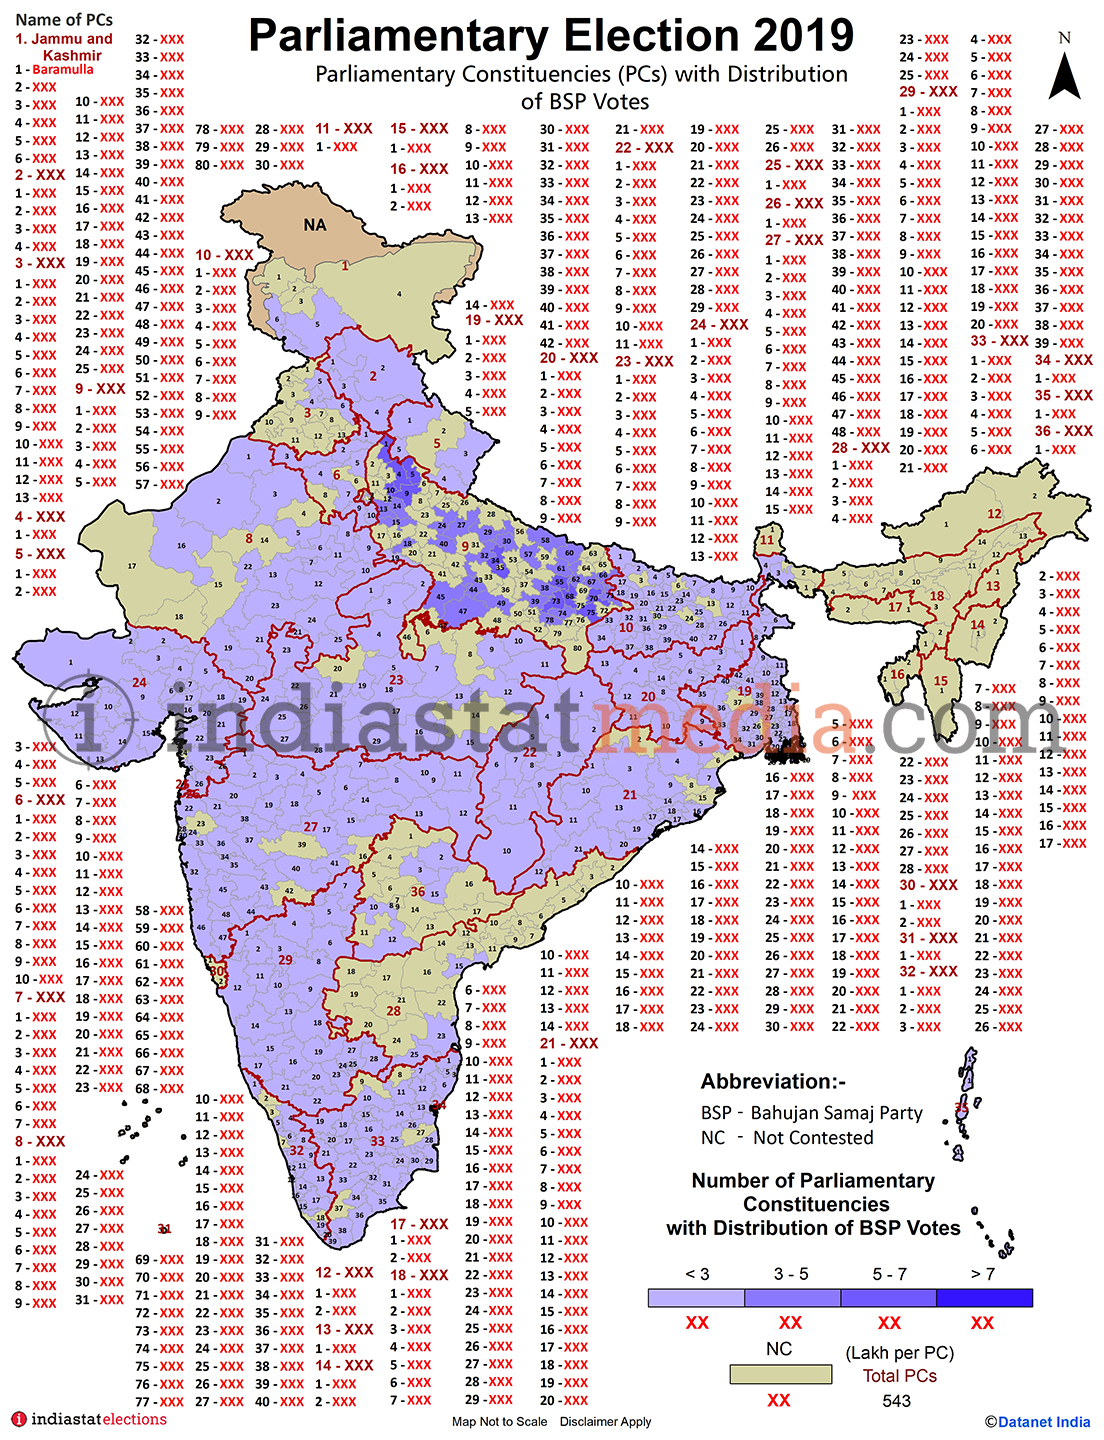 Distribution of BSP Votes by Parliamentary Constituencies in India (Parliamentary Election - 2019)